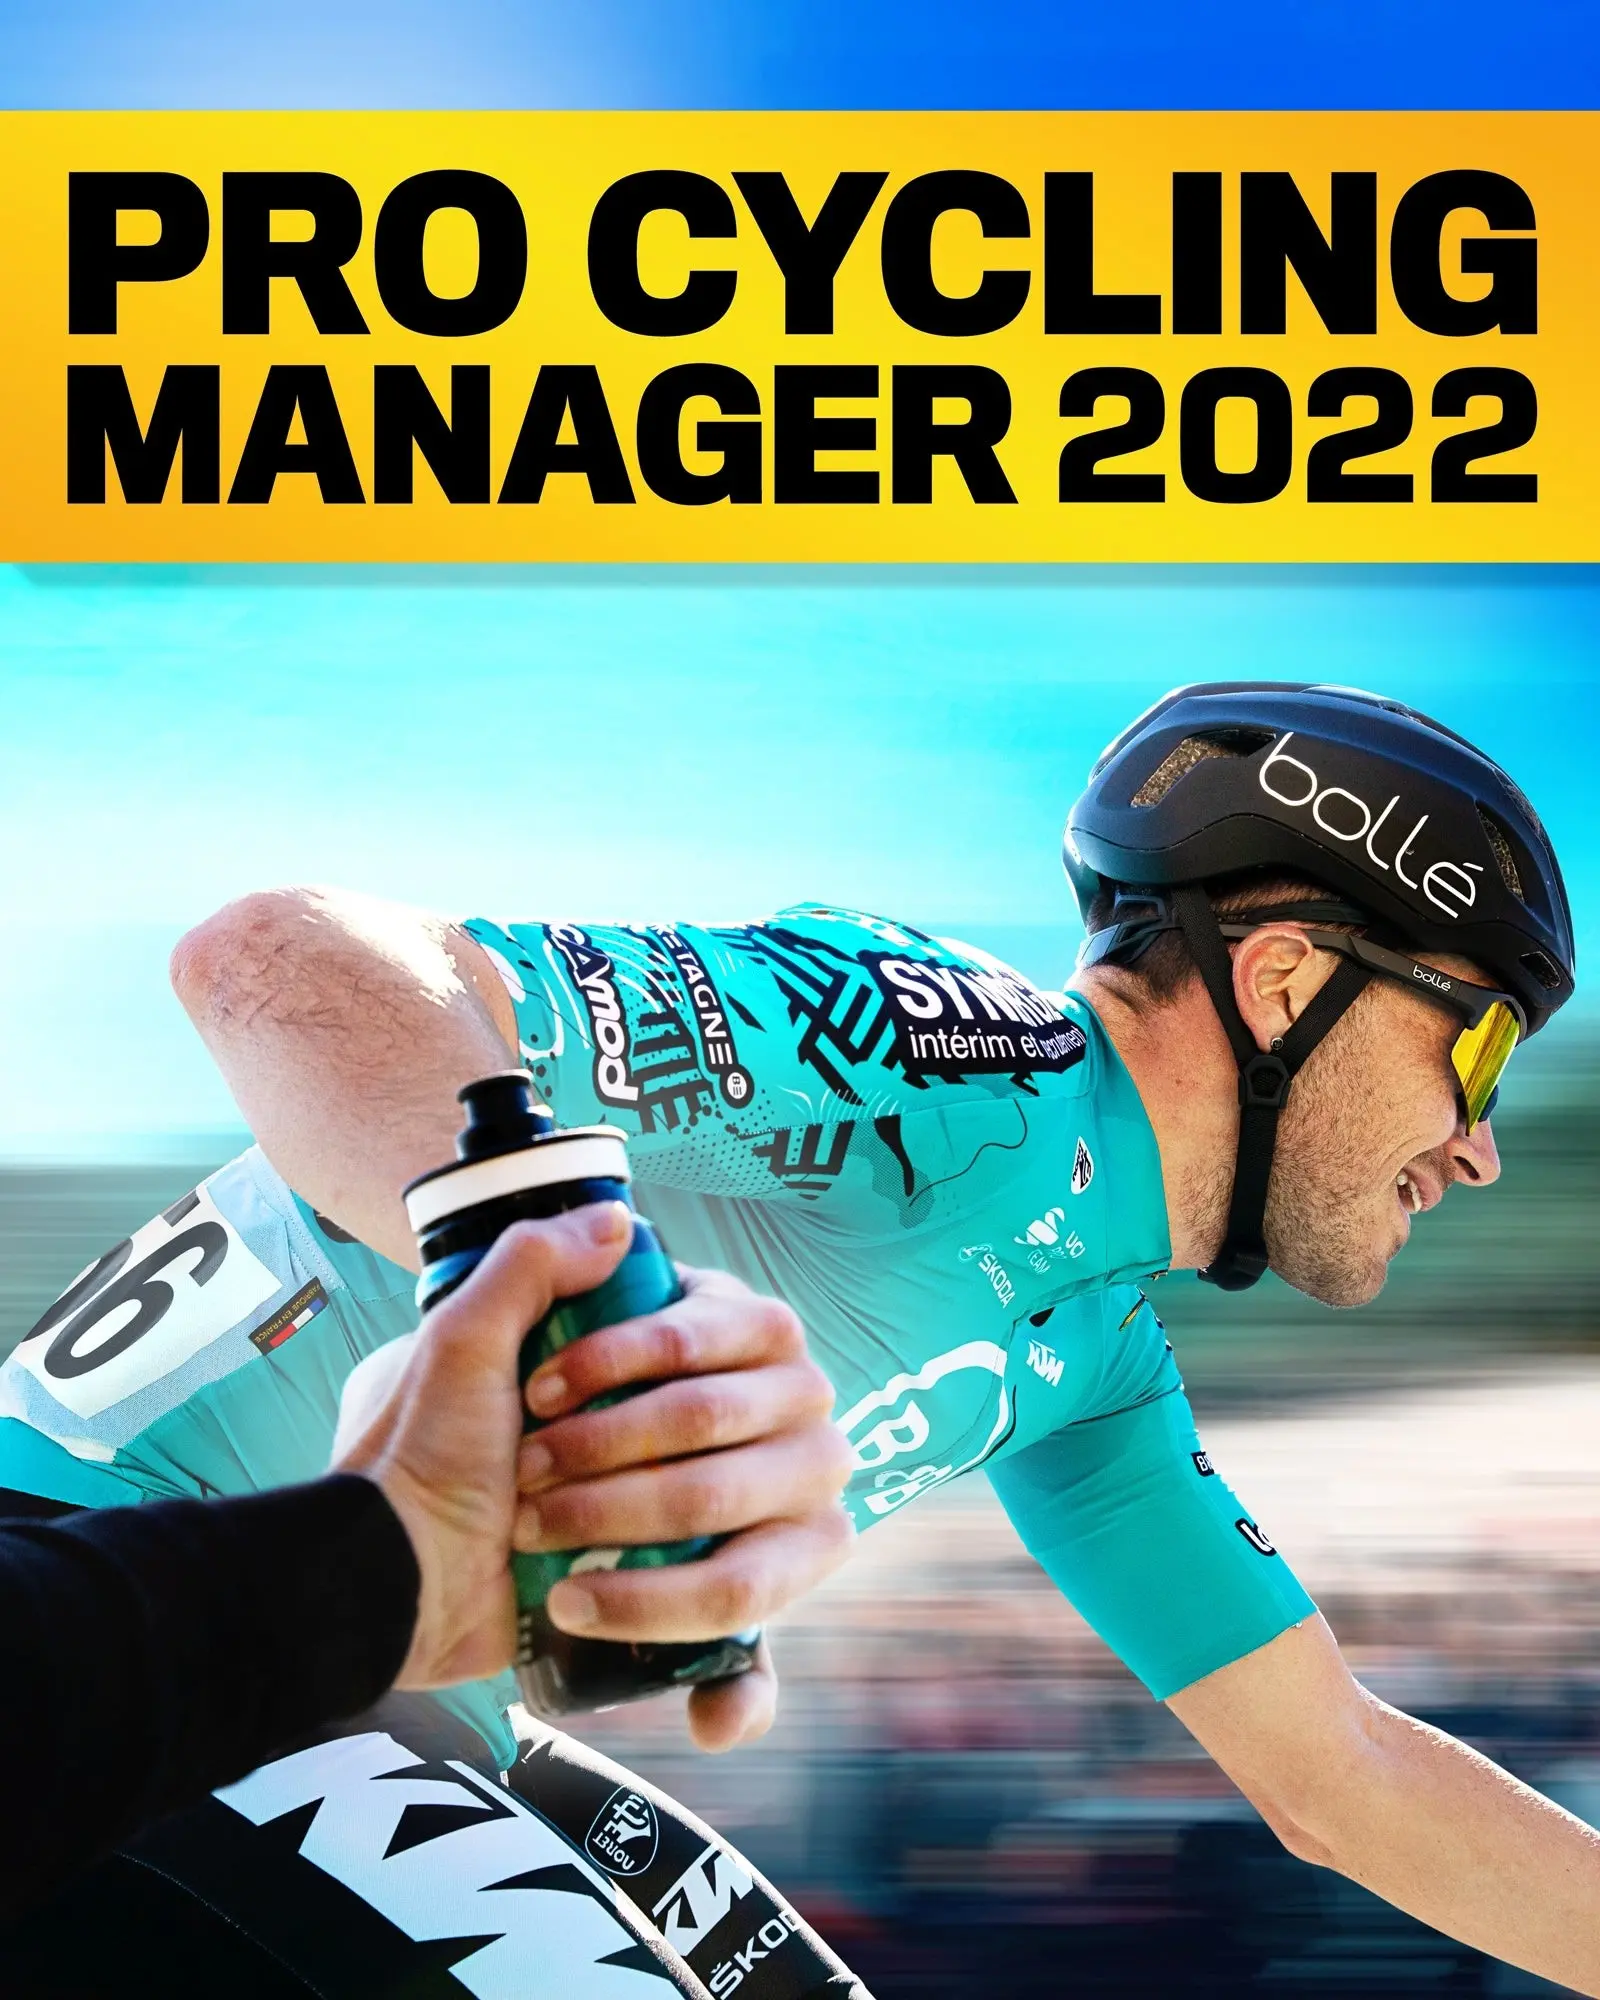 Pro Cycling Manager 2022 (PC) - Steam - Digital Code